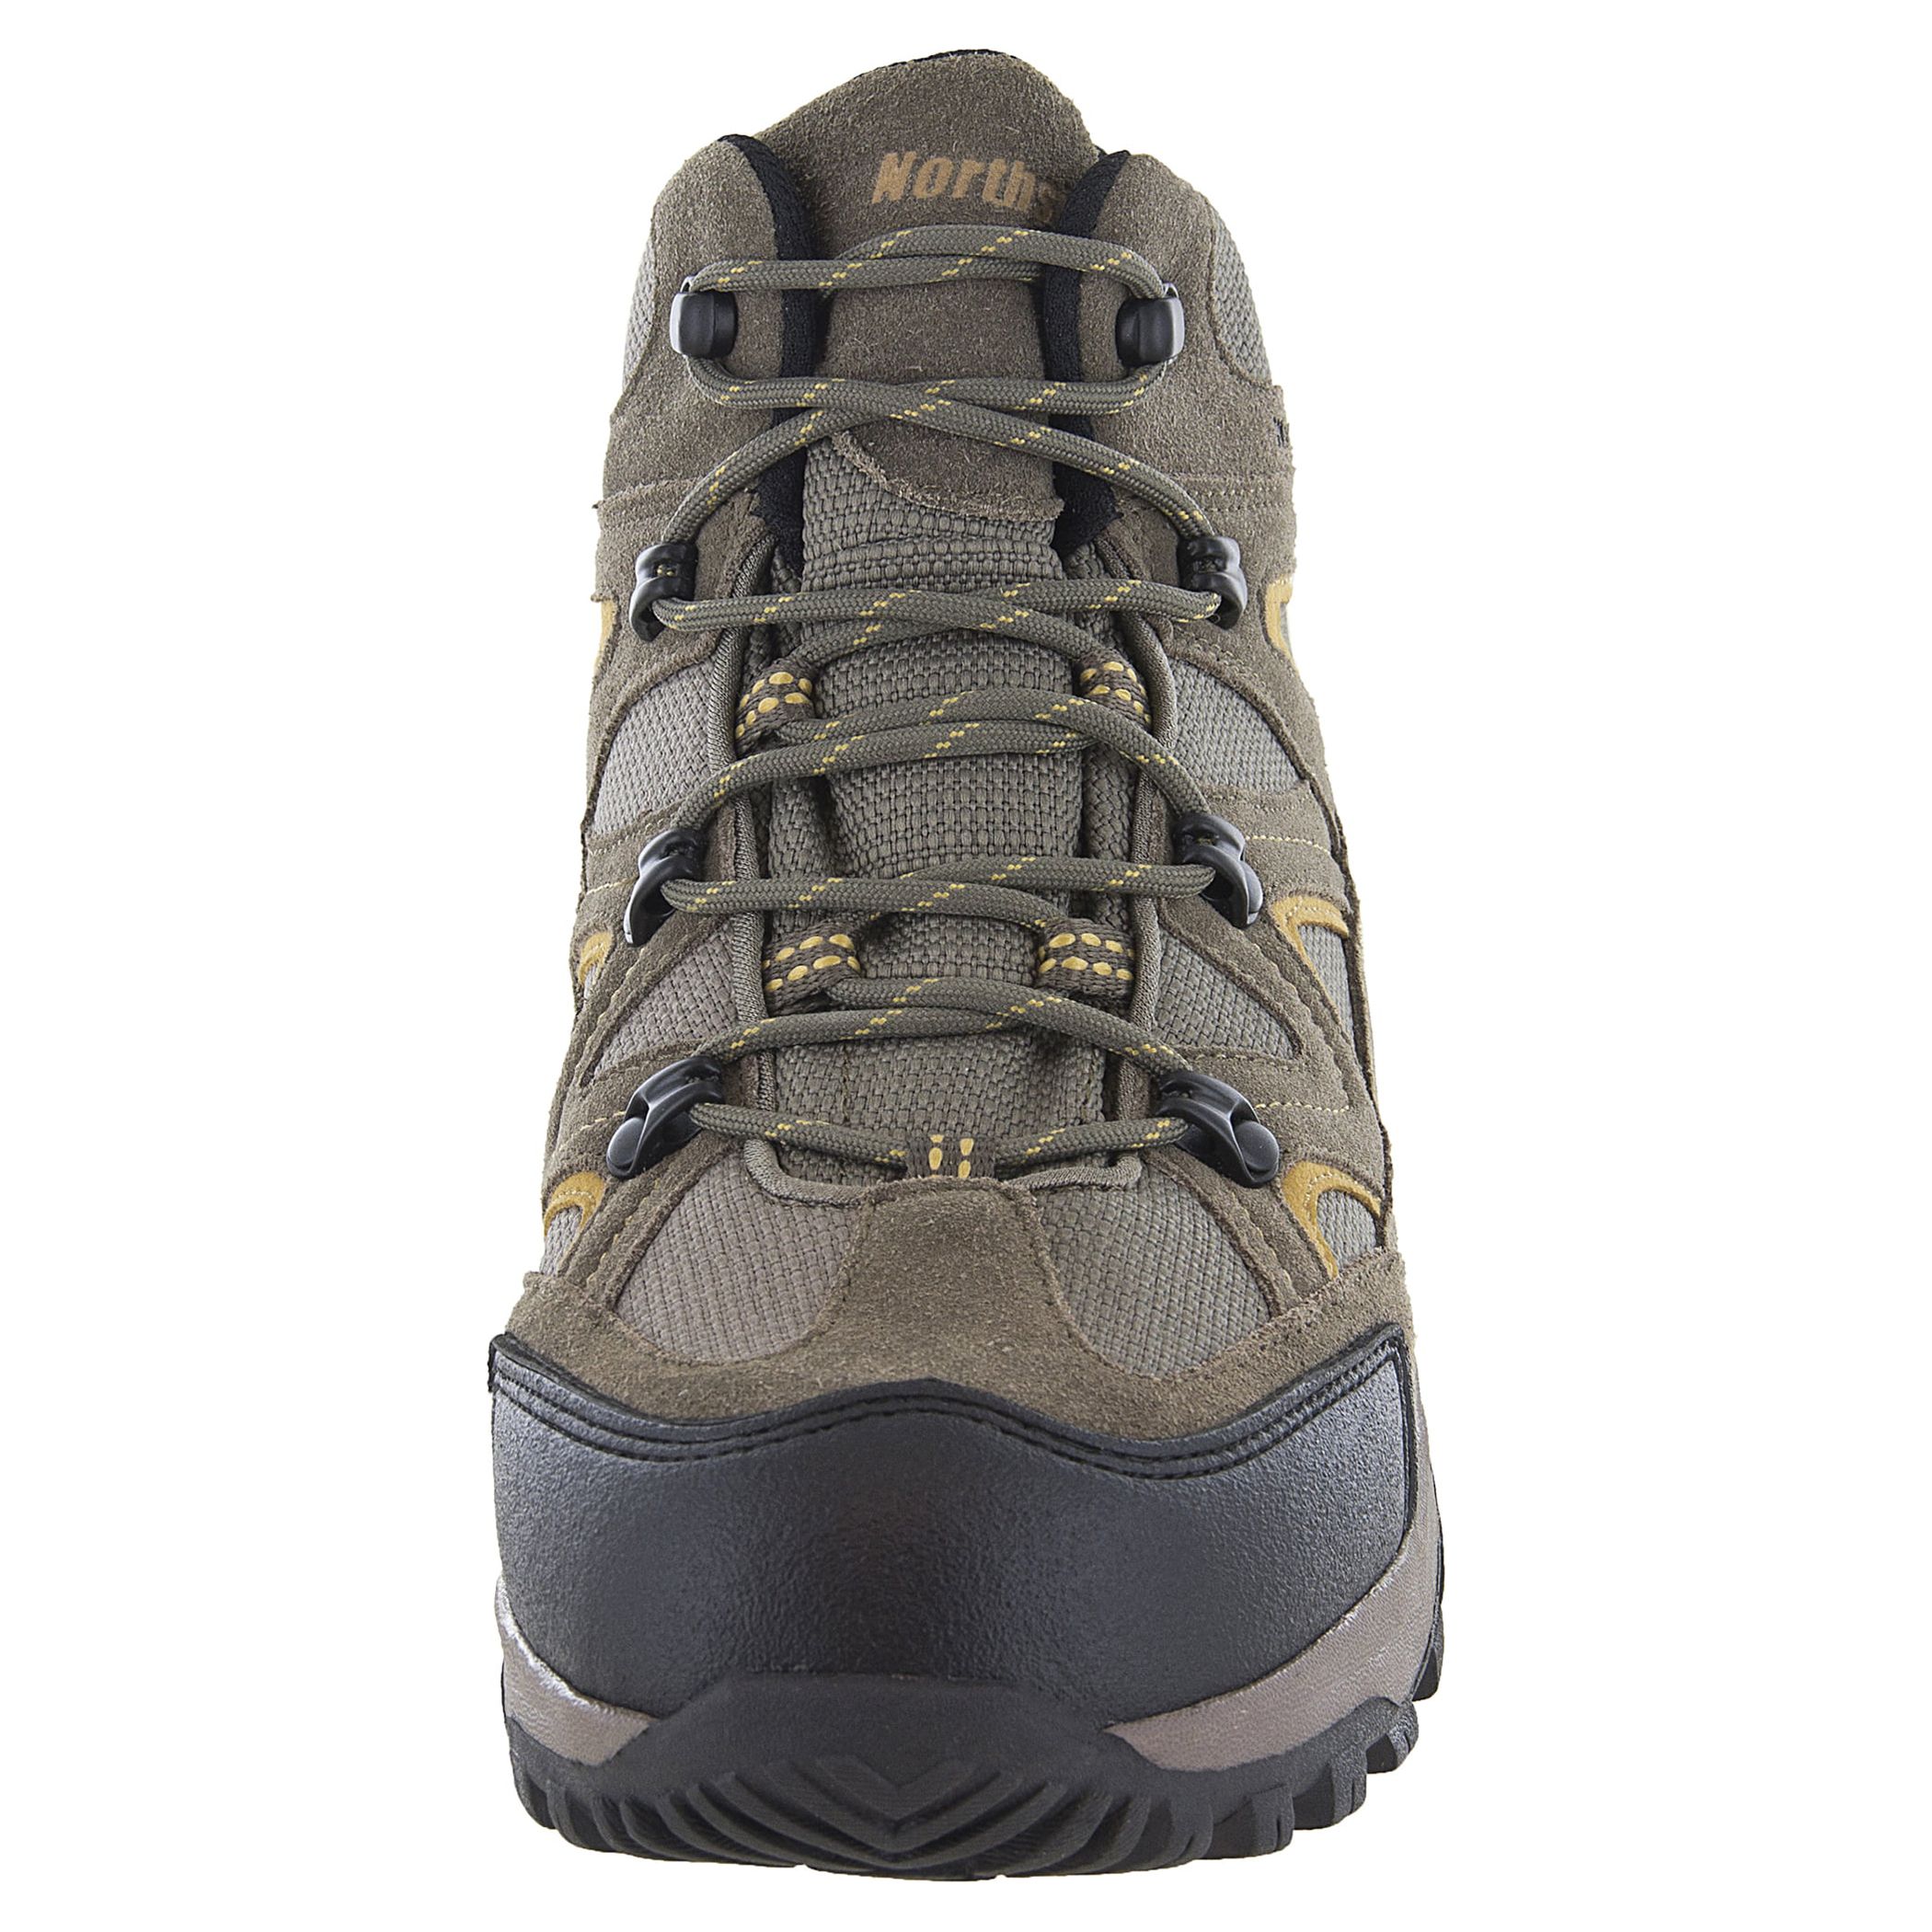 Northside Men's Snohomish Mid Waterproof Hiking Boot (Wide Available) - image 2 of 6